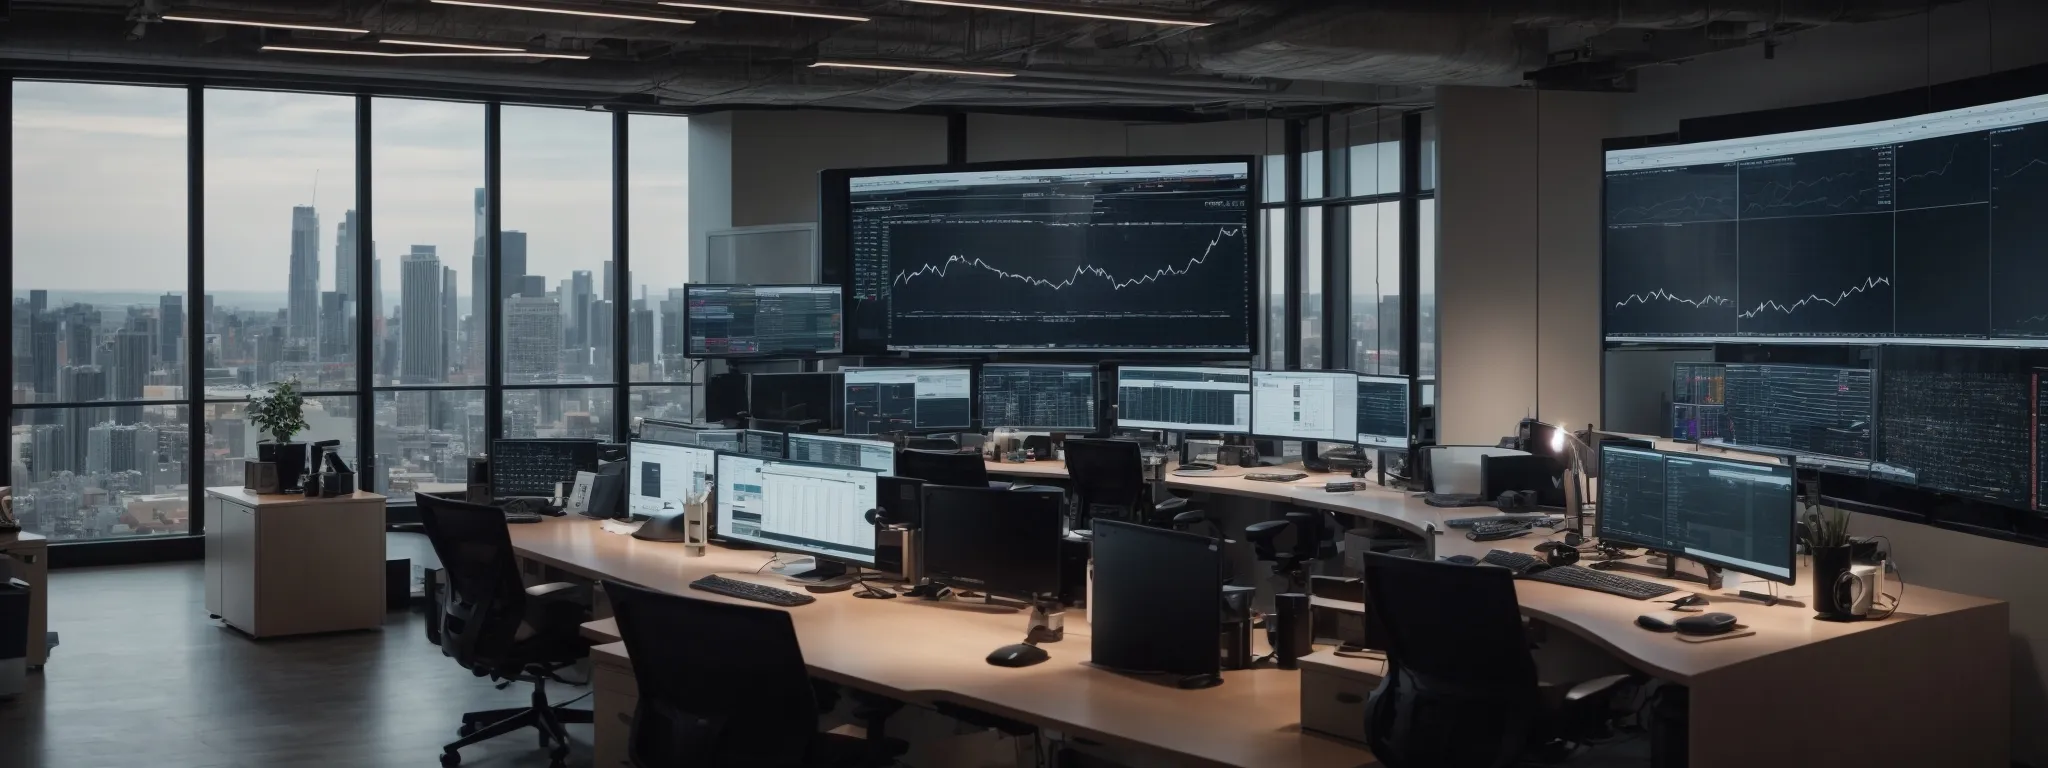 a panoramic view of a sleek, modern office space with multiple computer monitors displaying graphs, analytics, and website data.